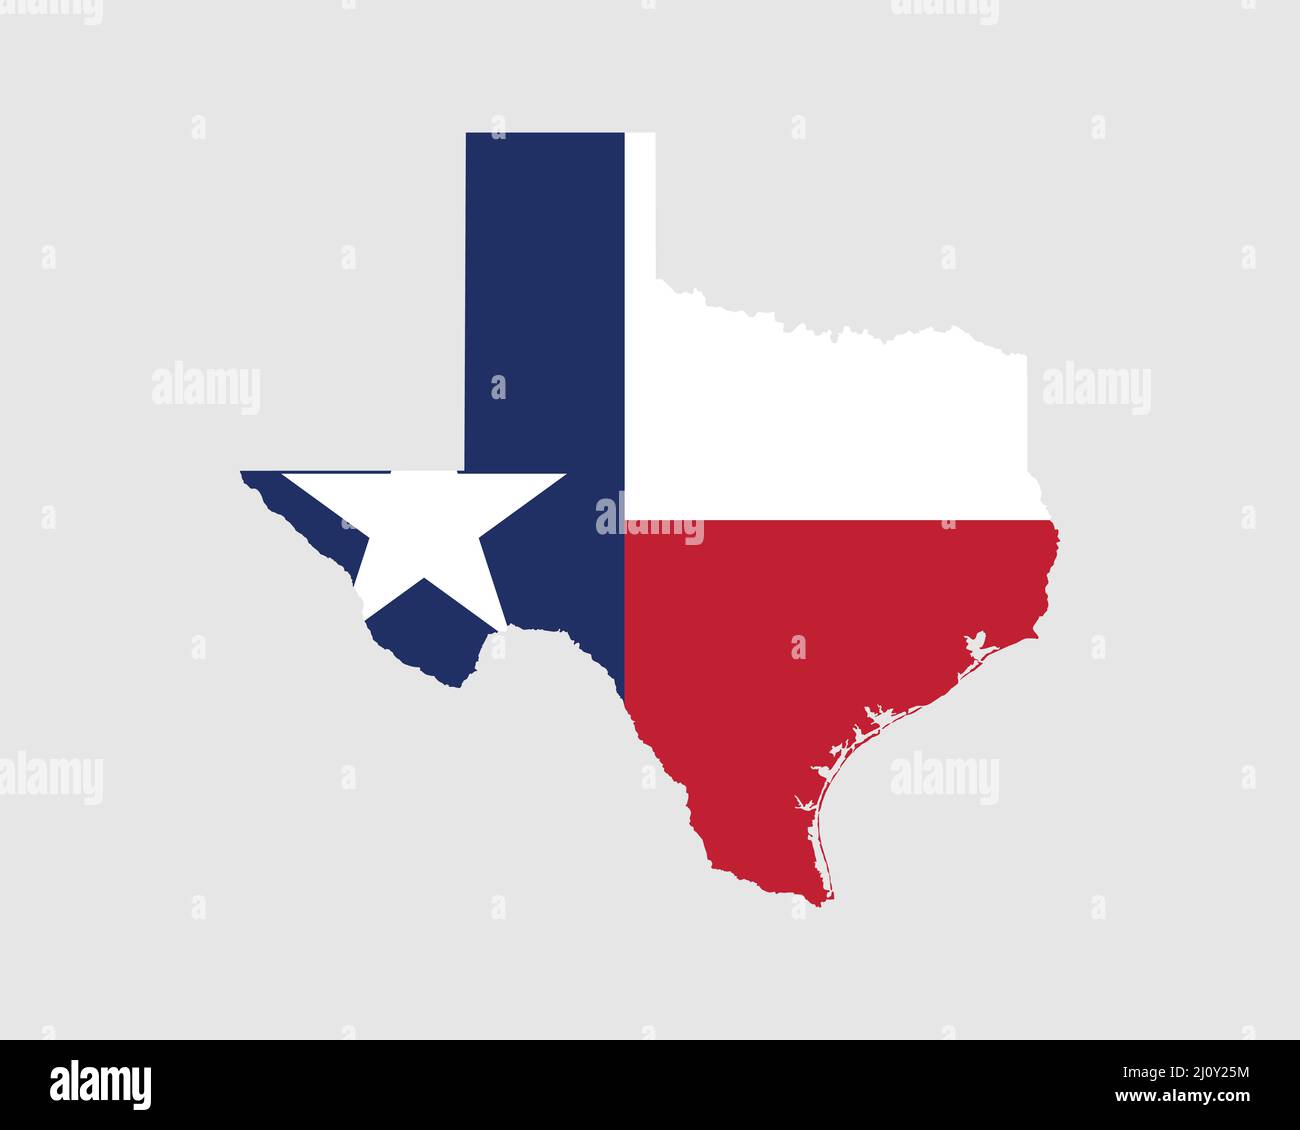 Texas Map Flag. Map of TX, USA with the state flag. United States, America, American, United States of America, US State Banner. Vector illustration. Stock Vector